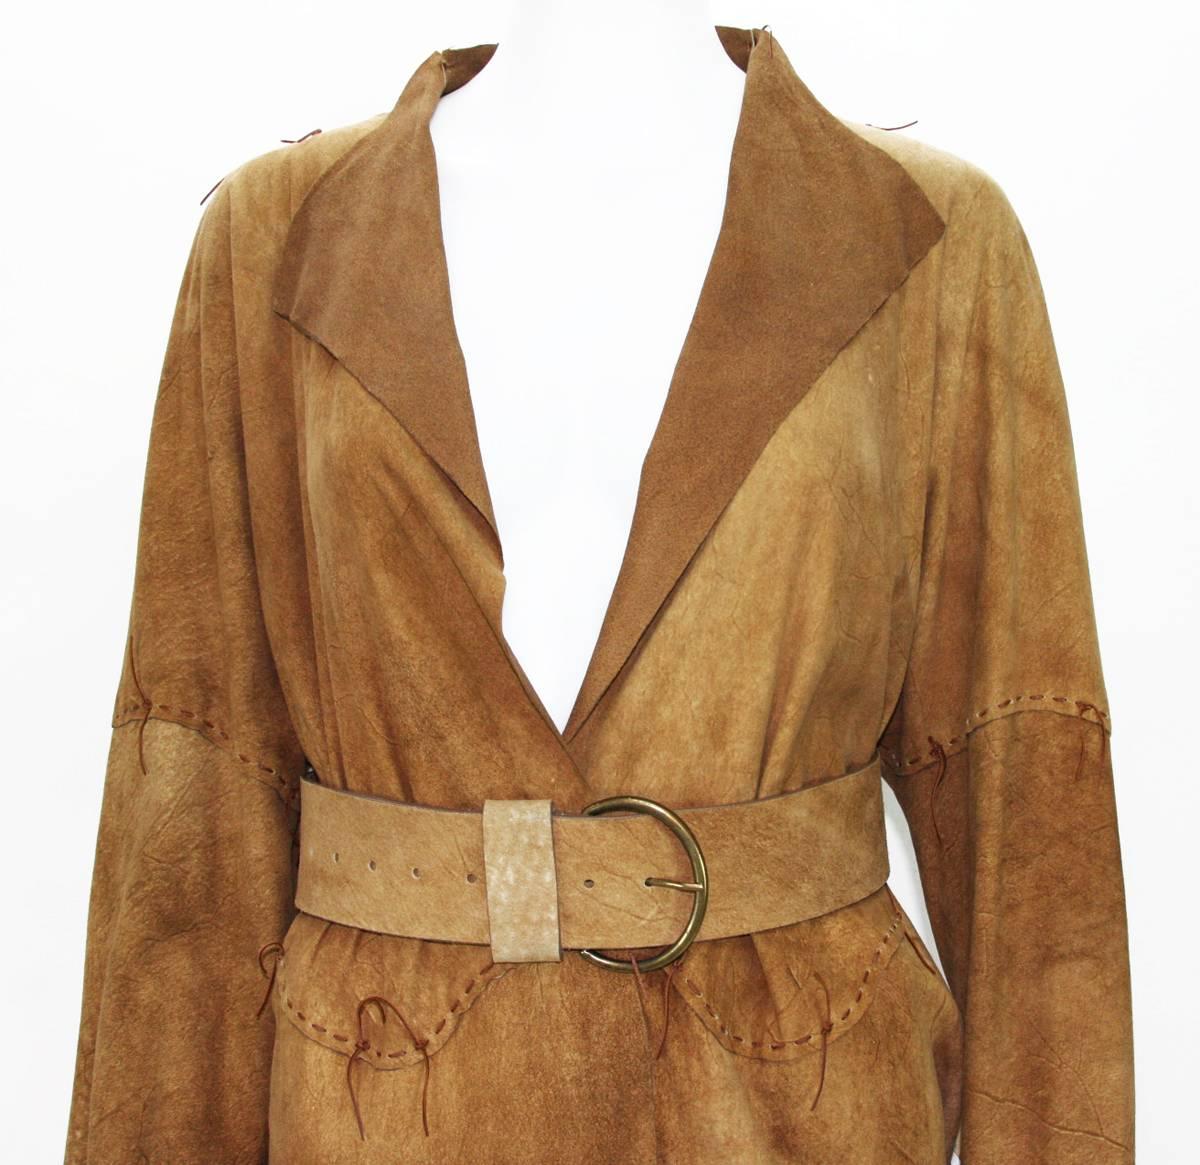 Super Rare Tom Ford for Yves Saint Laurent S/S 2002 Safari Collection Suede Coat 2